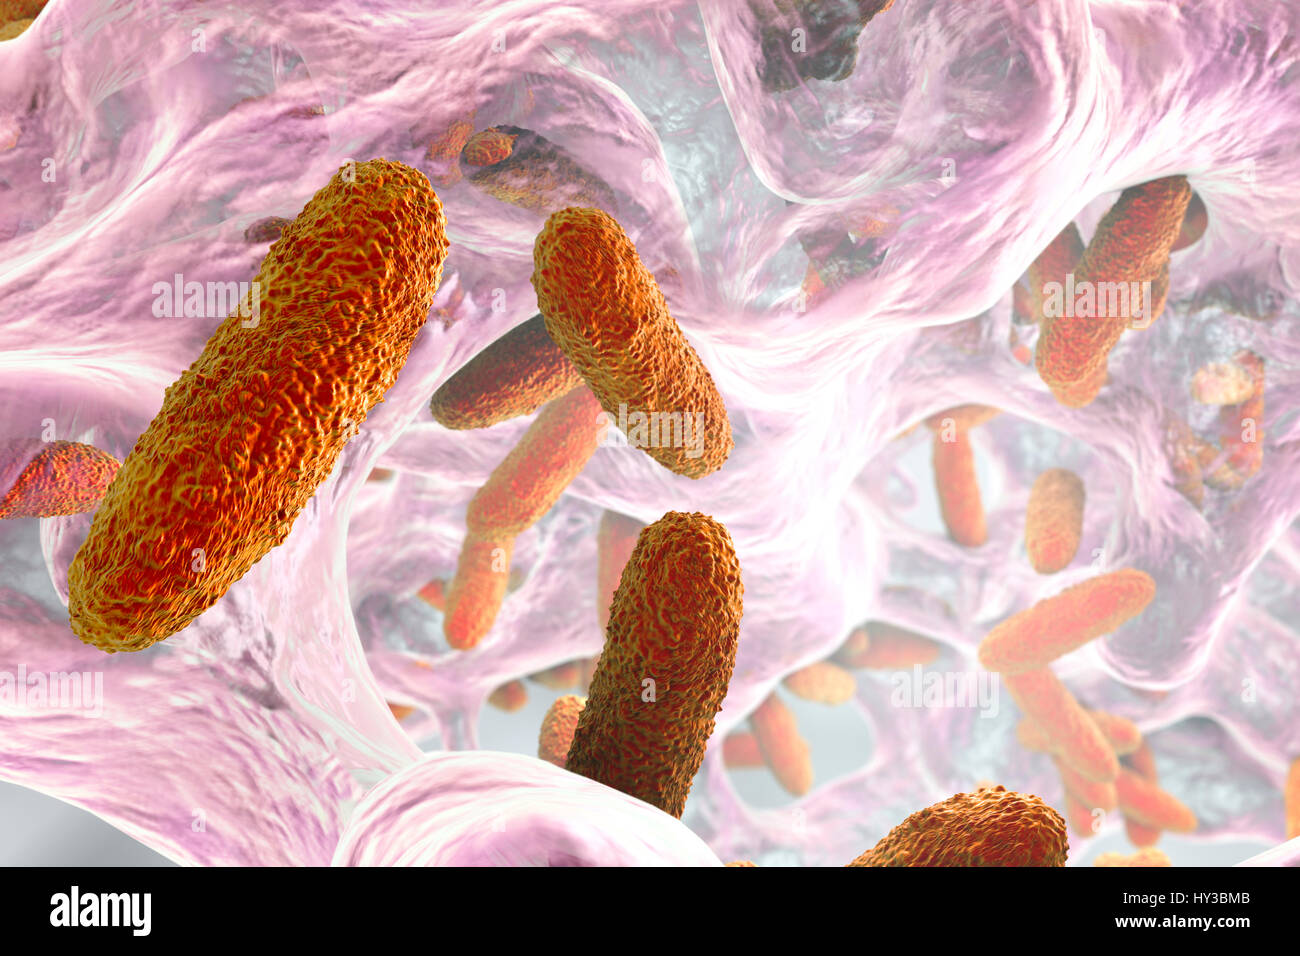 Klebsiella pneumoniae bacteria in biofilm,computer illustration.K.pneumoniae are Gram-negative,encapsulated,non-motile,enteric,rod prokaryote.This species causes Friedlander's pneumonia urinary tract infections.K.pneumoniae's pathogenicity can be attributed to its production of heat-stable Stock Photo